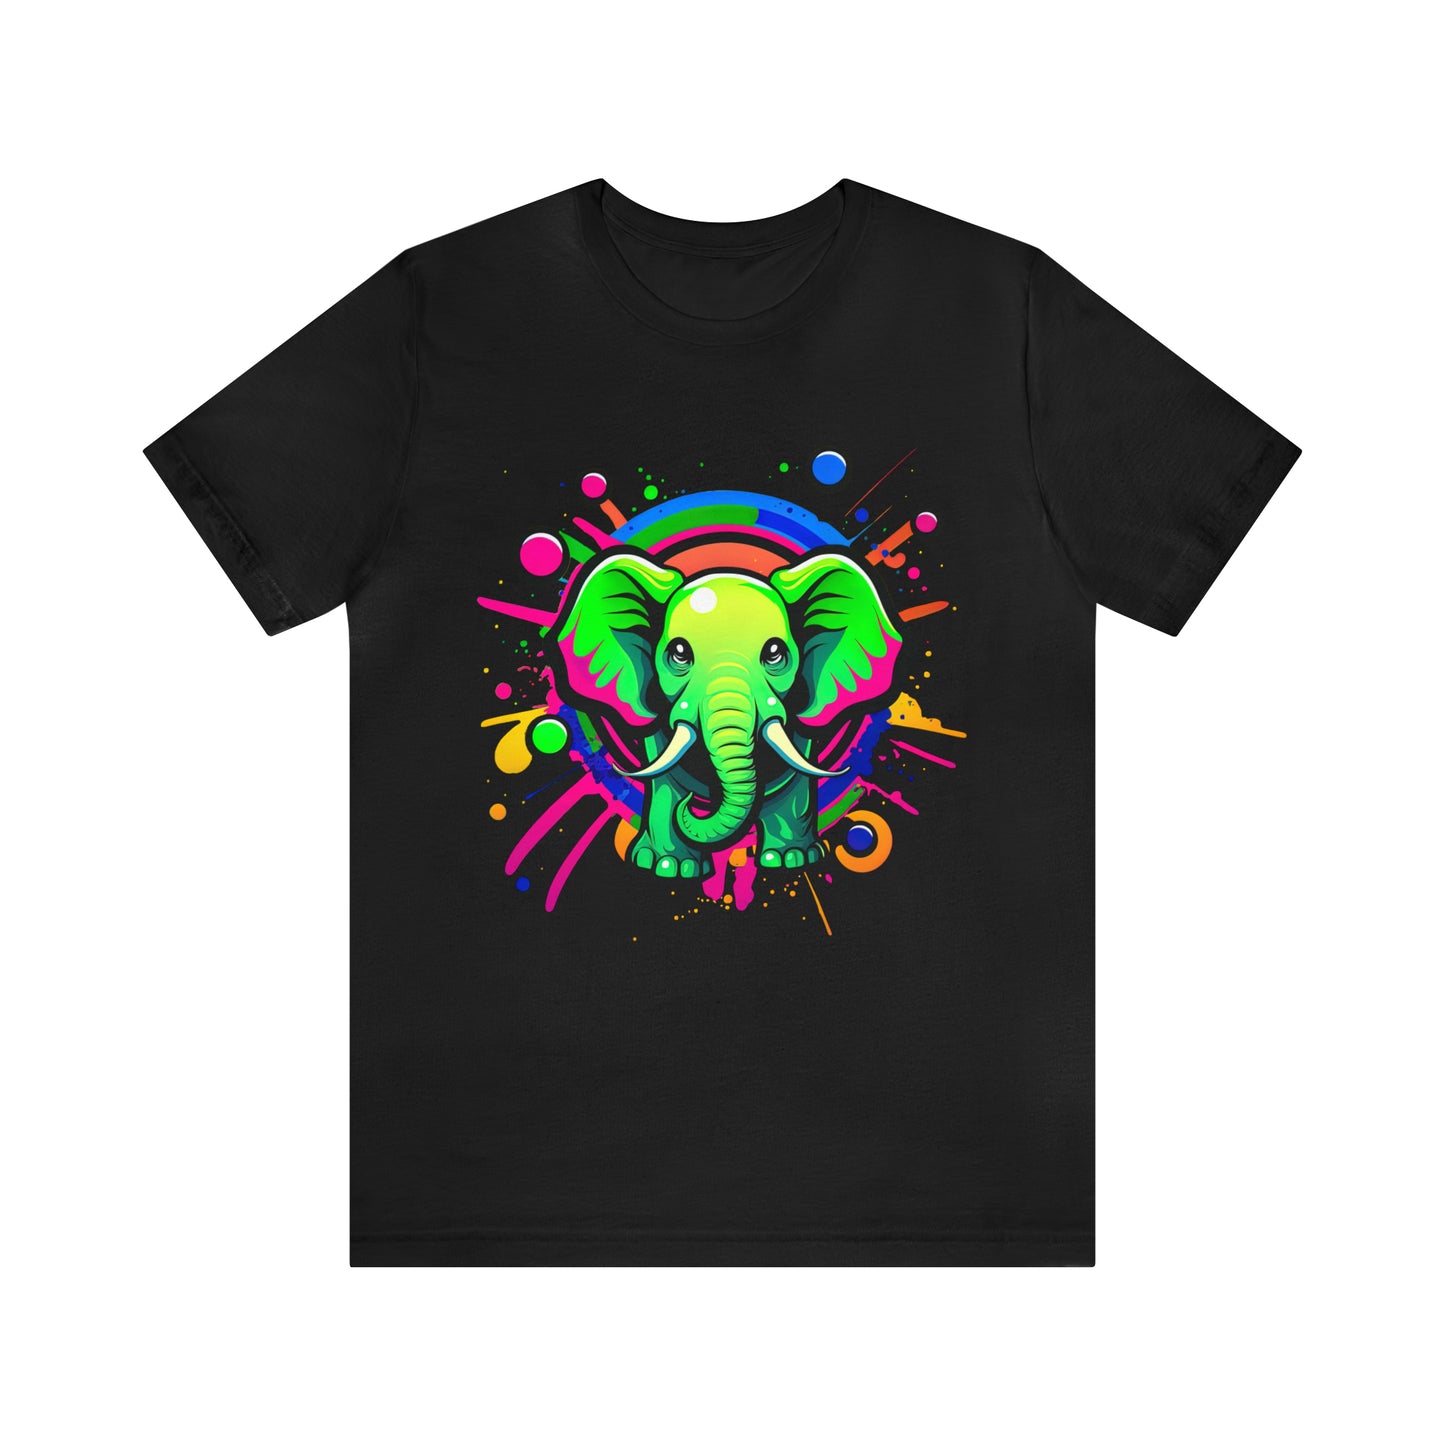 psychedelicBRANDz's Elephantasia Dream featuring an elephant on a black shirt